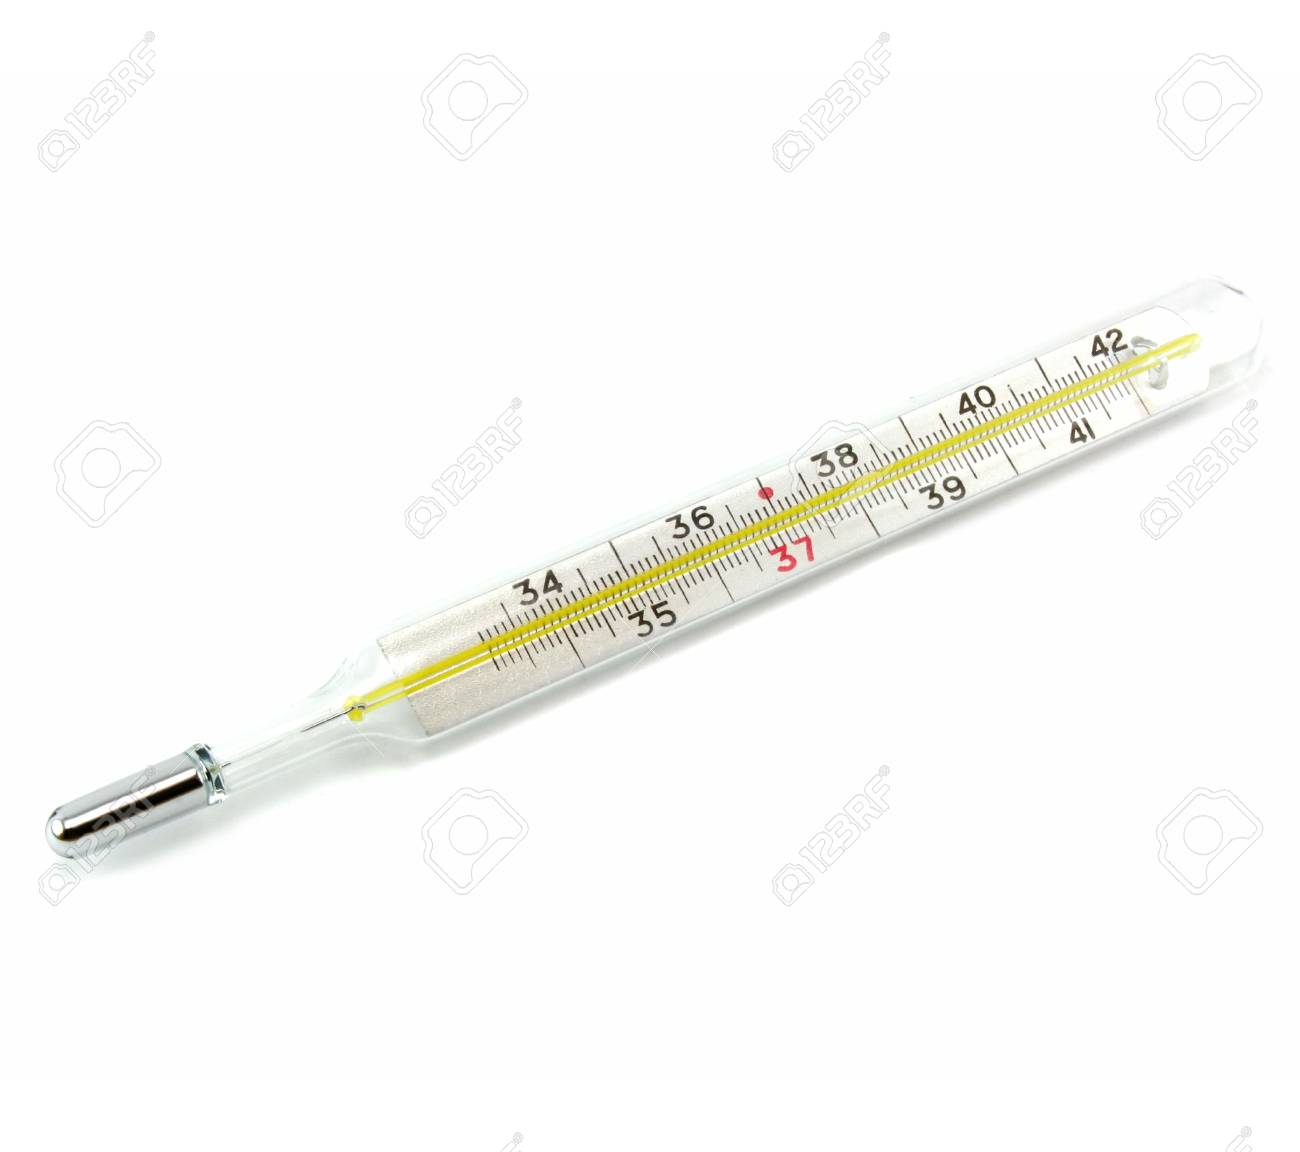 Clinical Mercury Thermometer Isolated On A White Background Stock